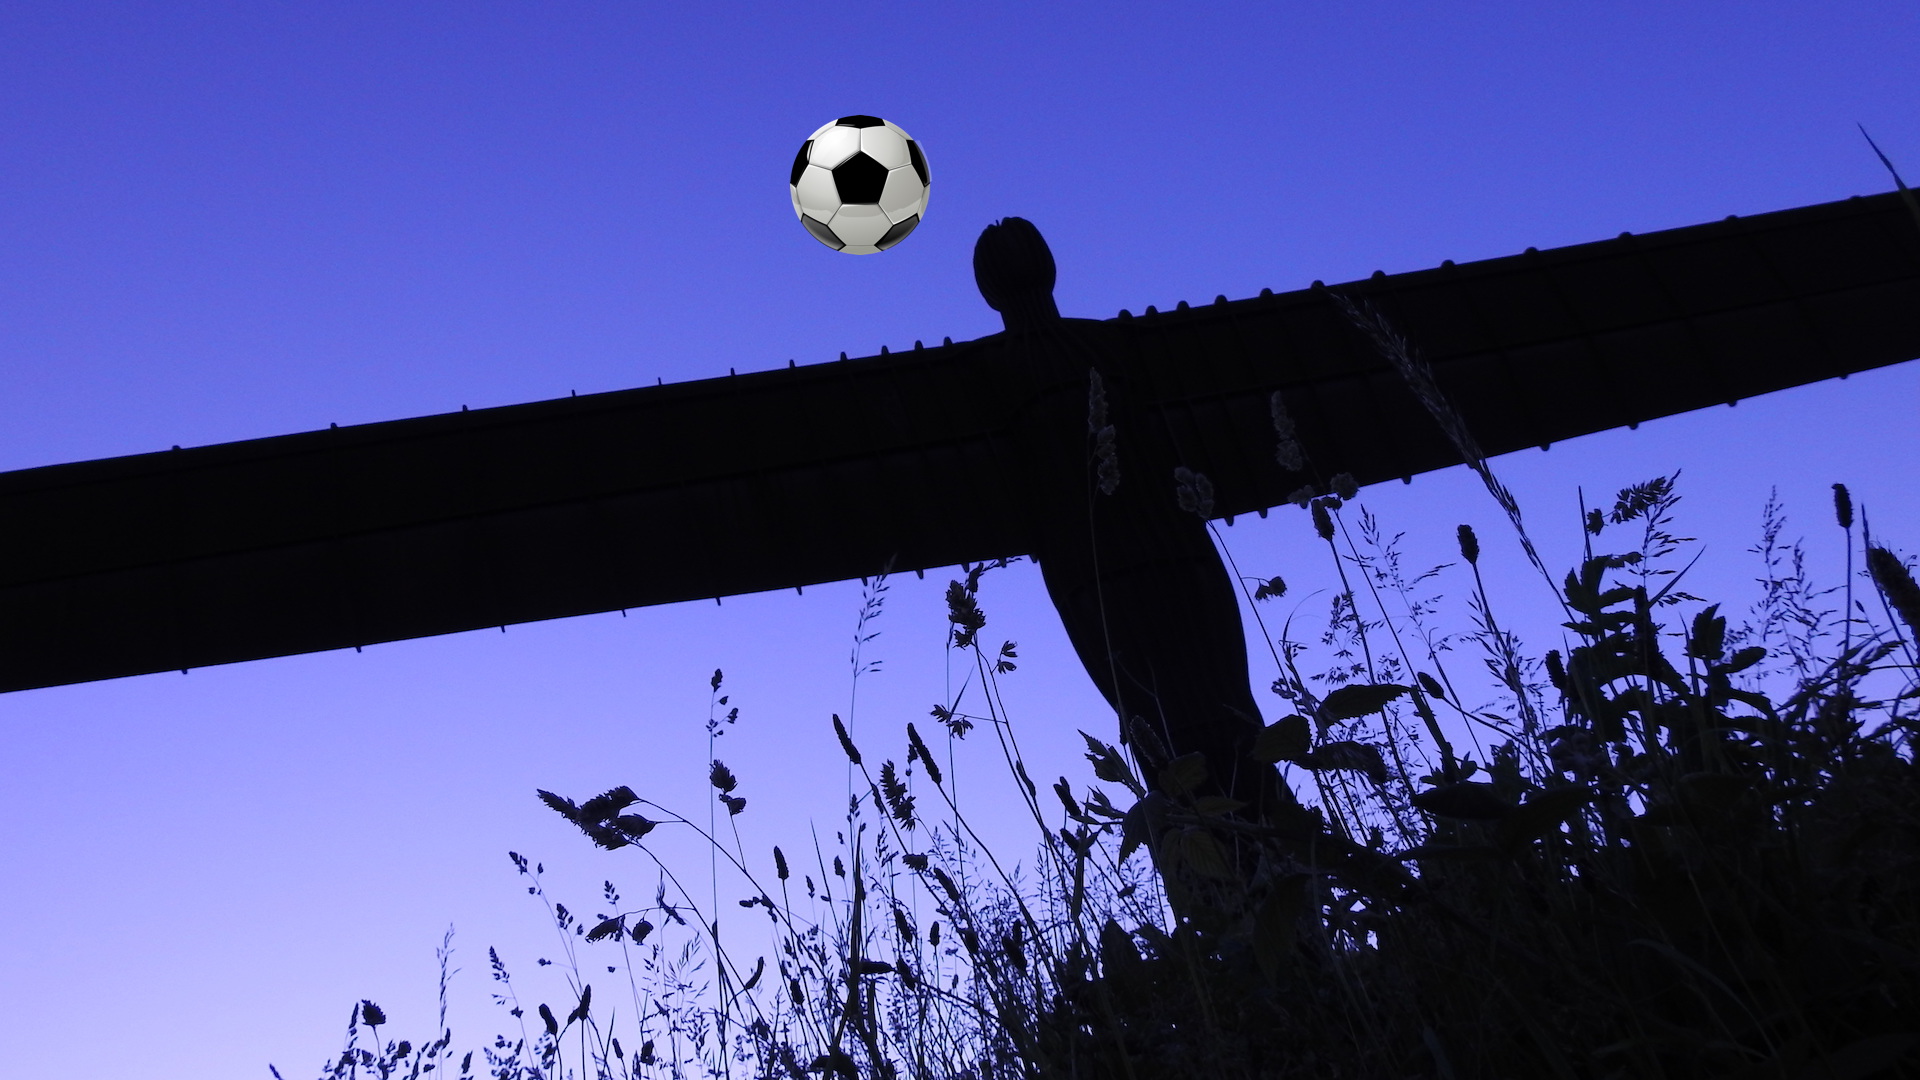 The Angel of the North heads a football